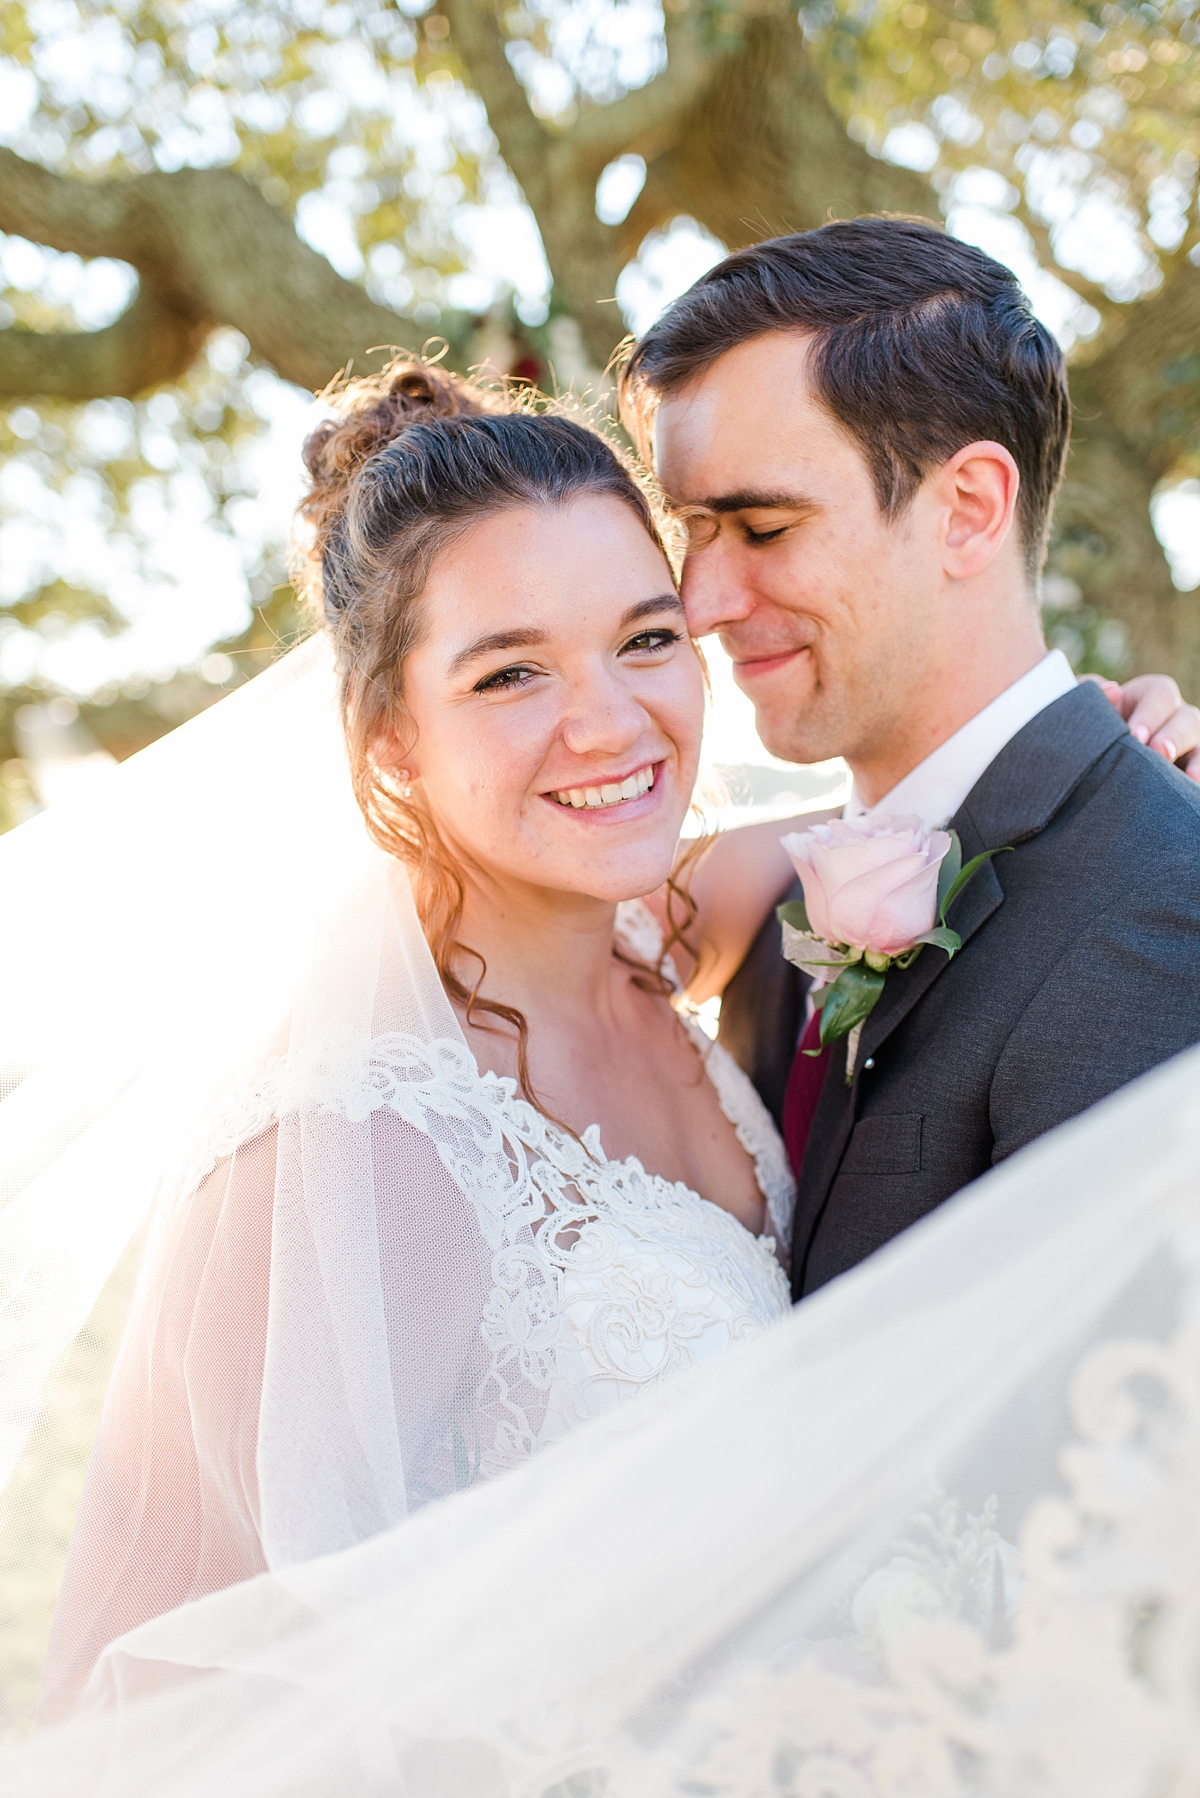 Bride and Groom Portraits with Veil at Lake Front Fall Wedding. Wedding Photography by Richmond Wedding Photographer Kailey Brianne Photography. 